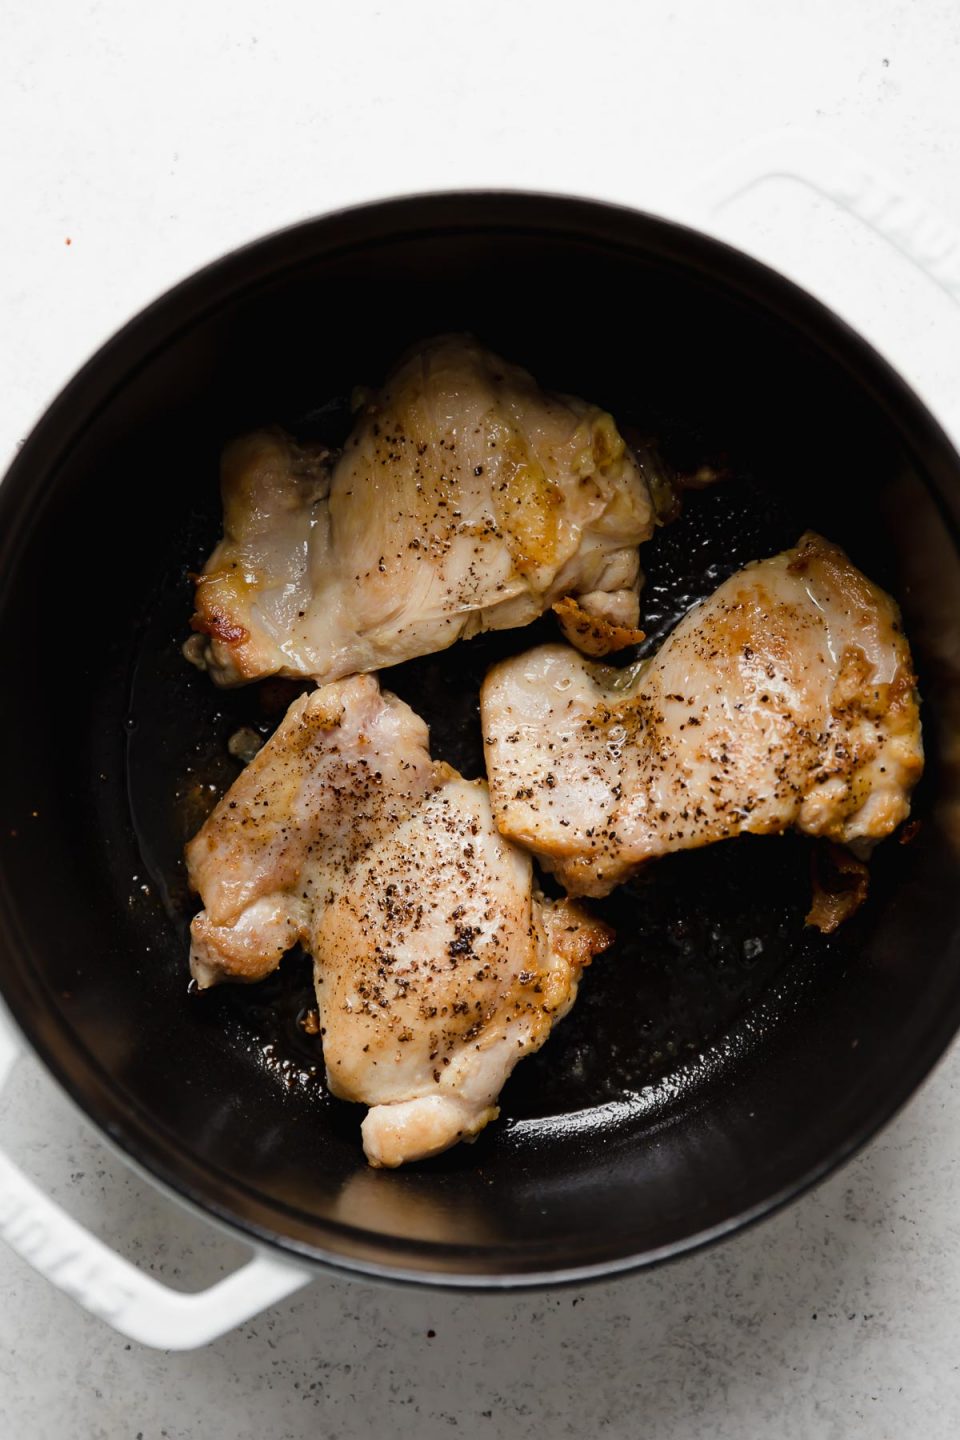 Searing chicken thighs is the first step in this Golden Chicken Soup recipe.